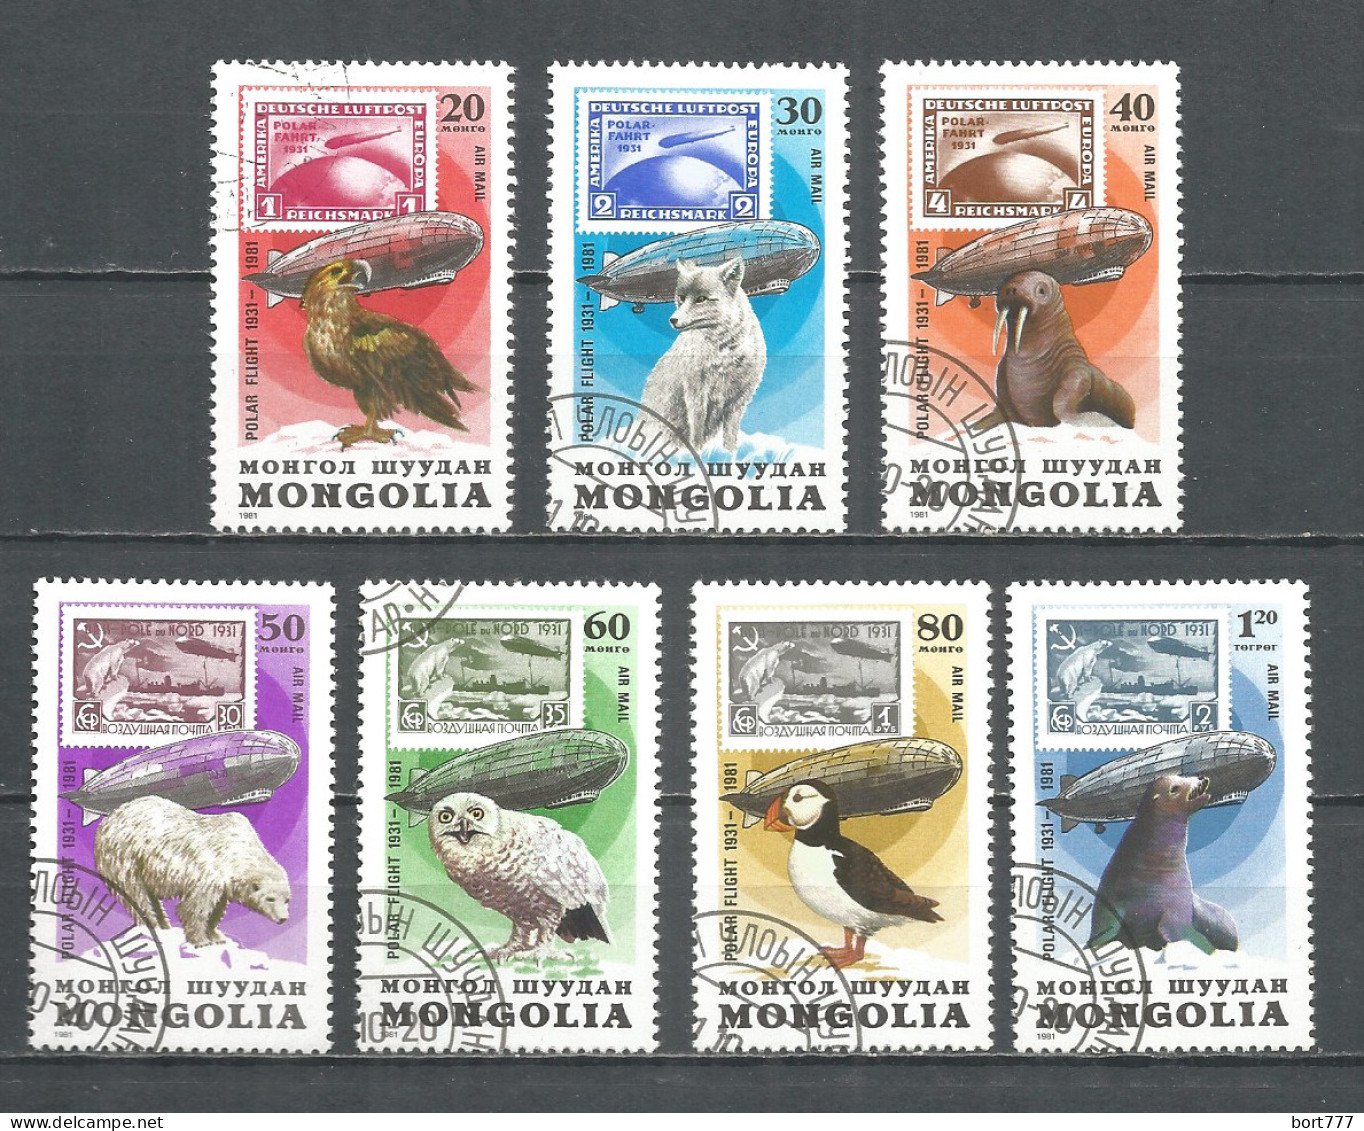 Mongolia 1981 Used Stamps CTO  - Mongolie